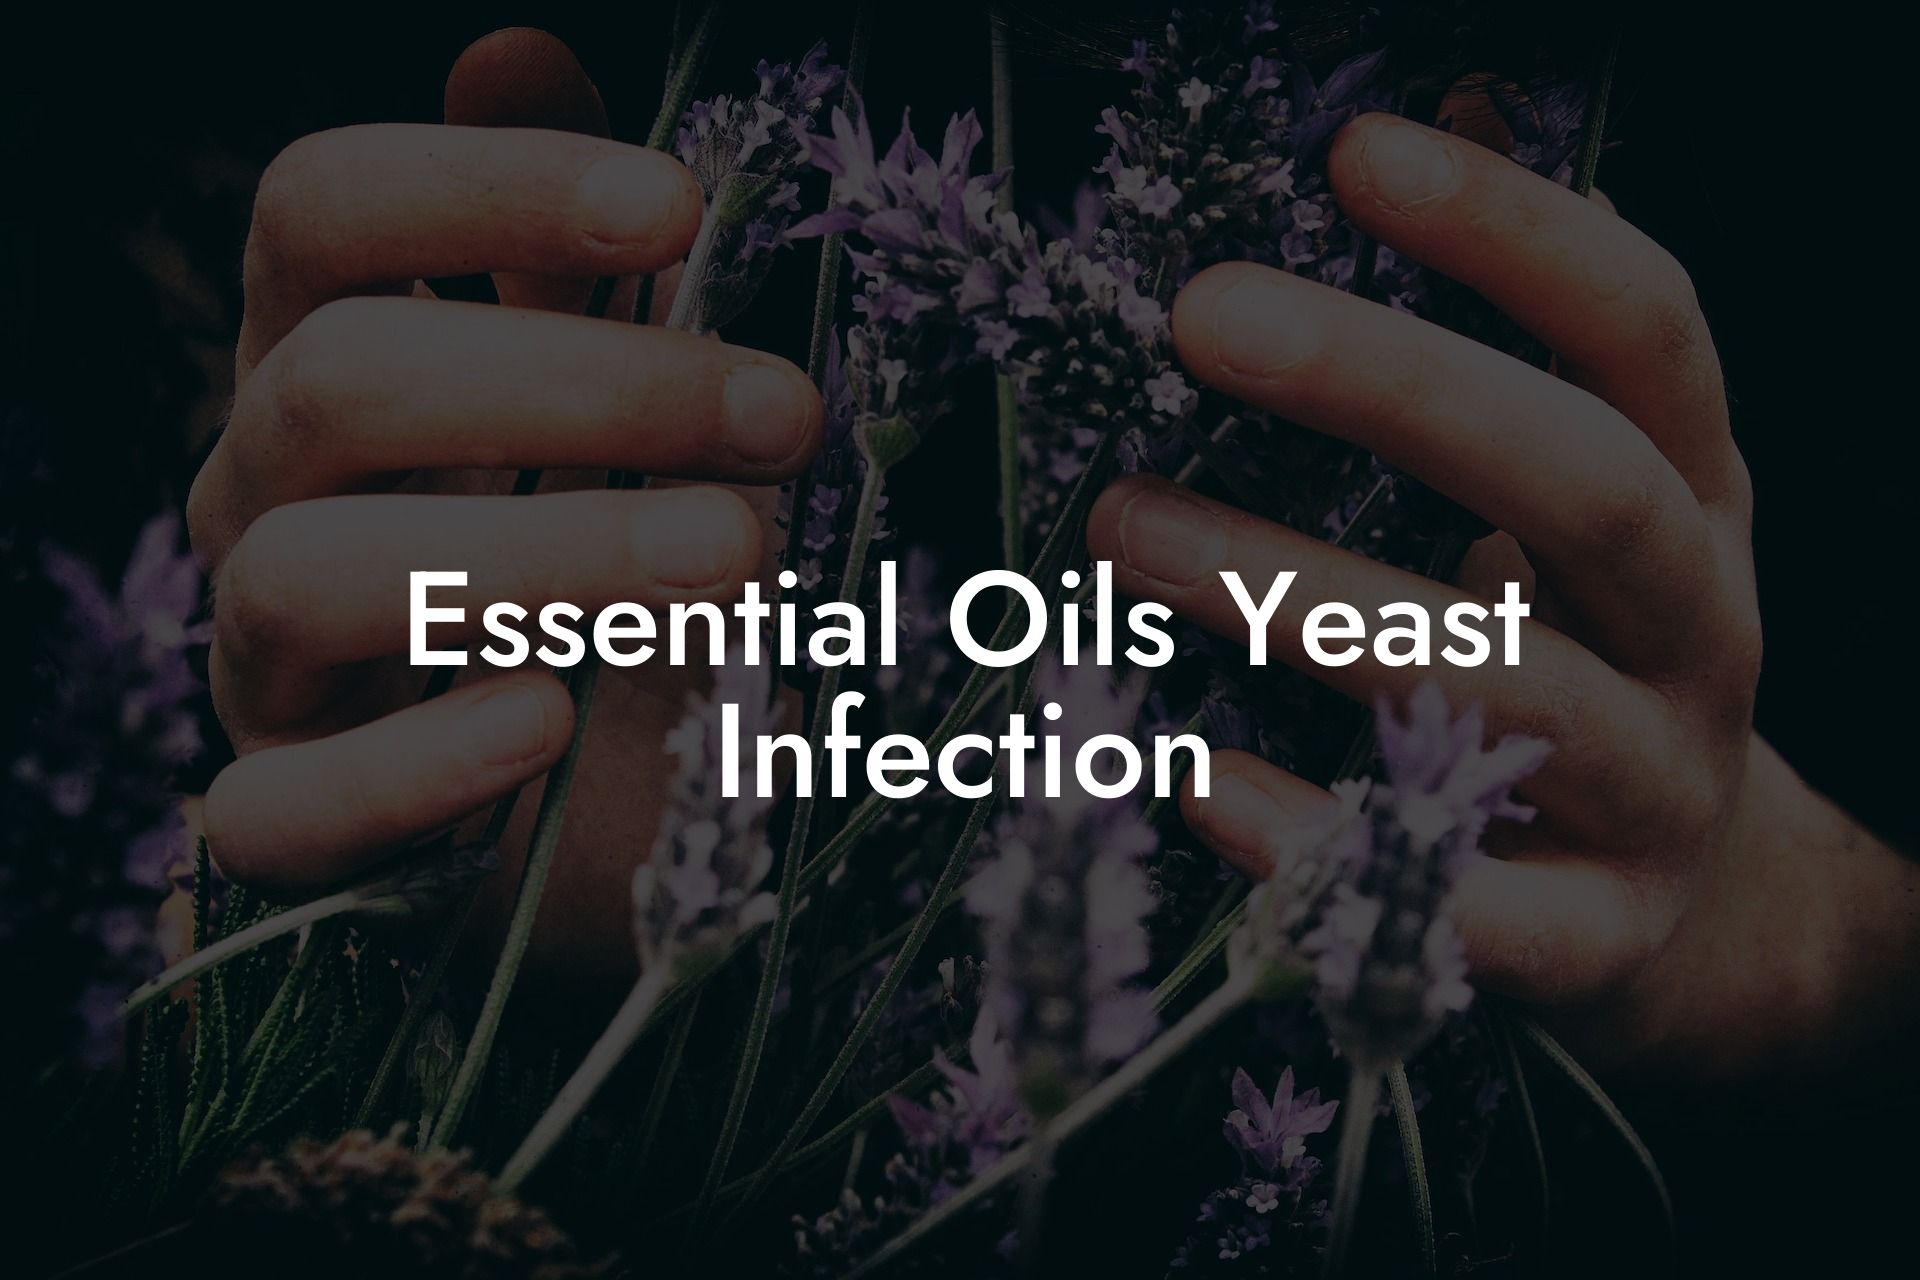 Essential Oils Yeast Infection